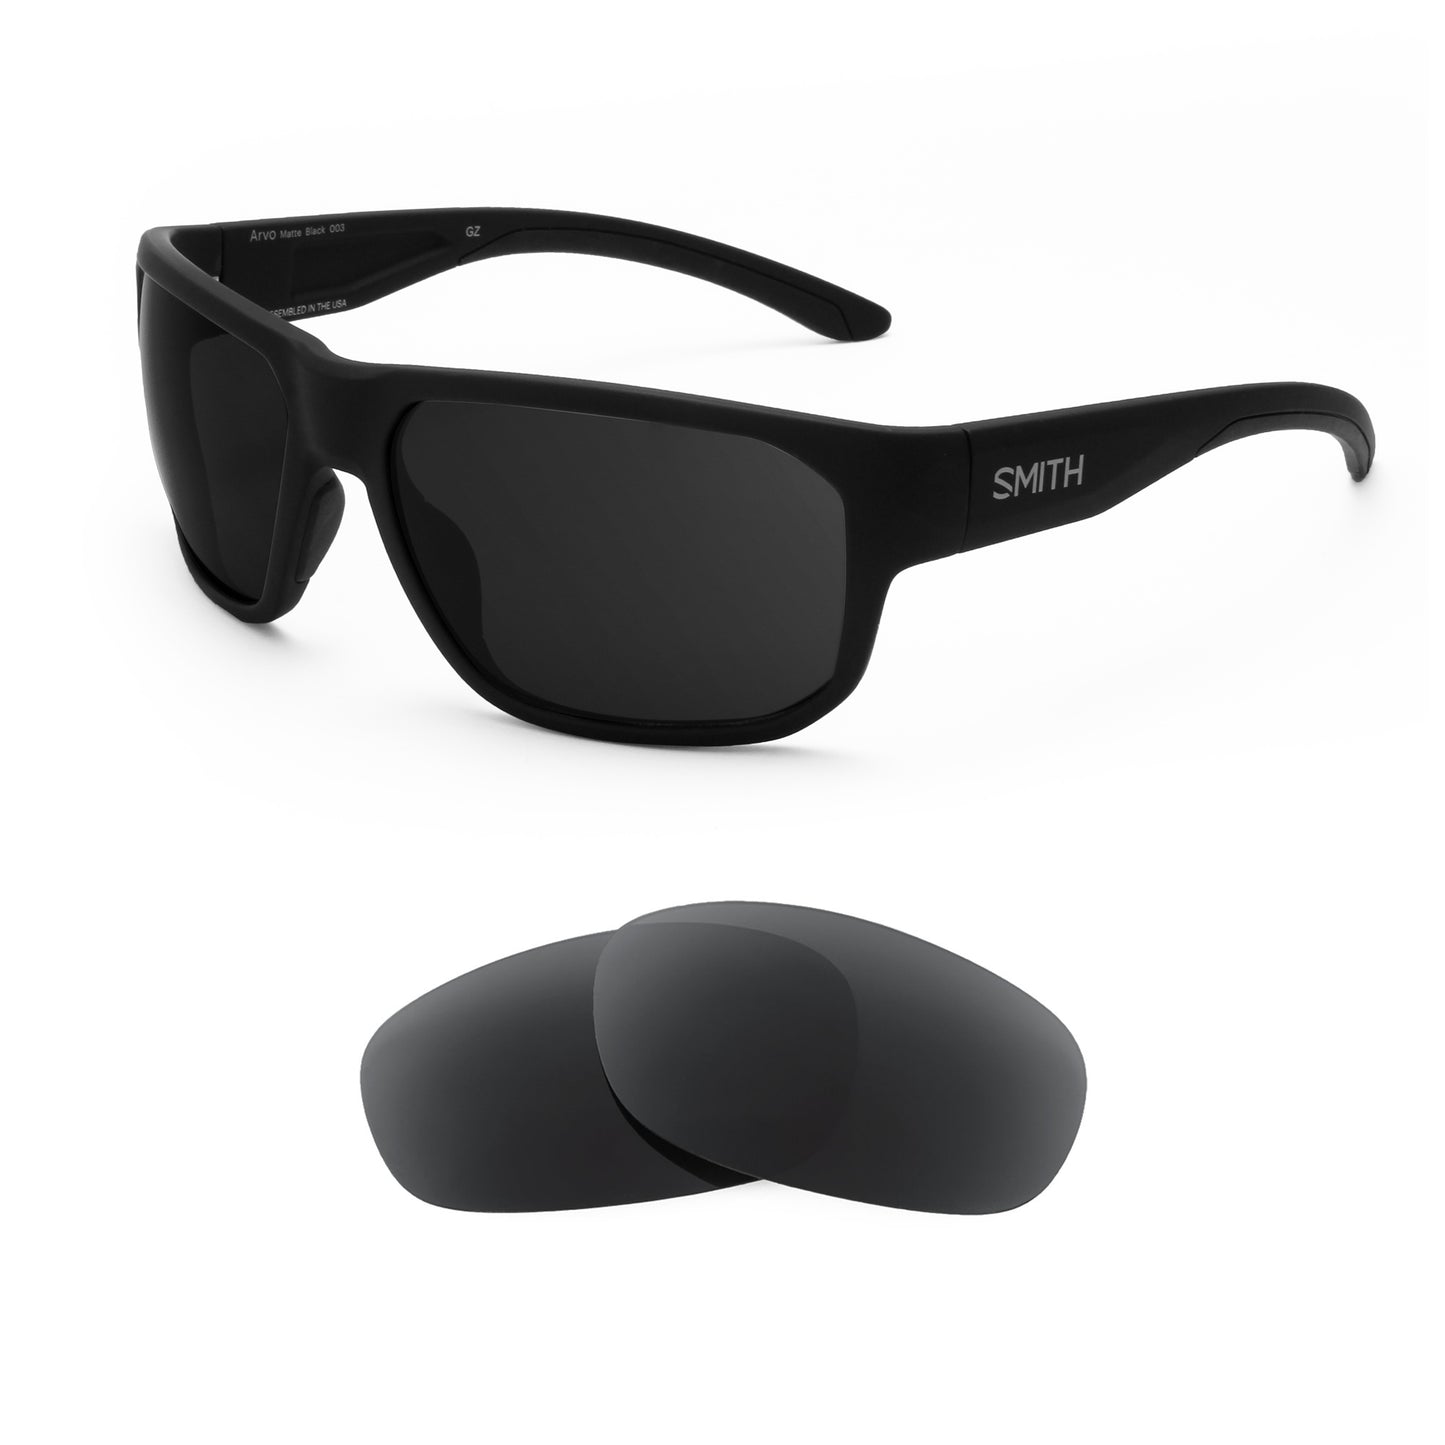 Smith Arvo sunglasses with replacement lenses